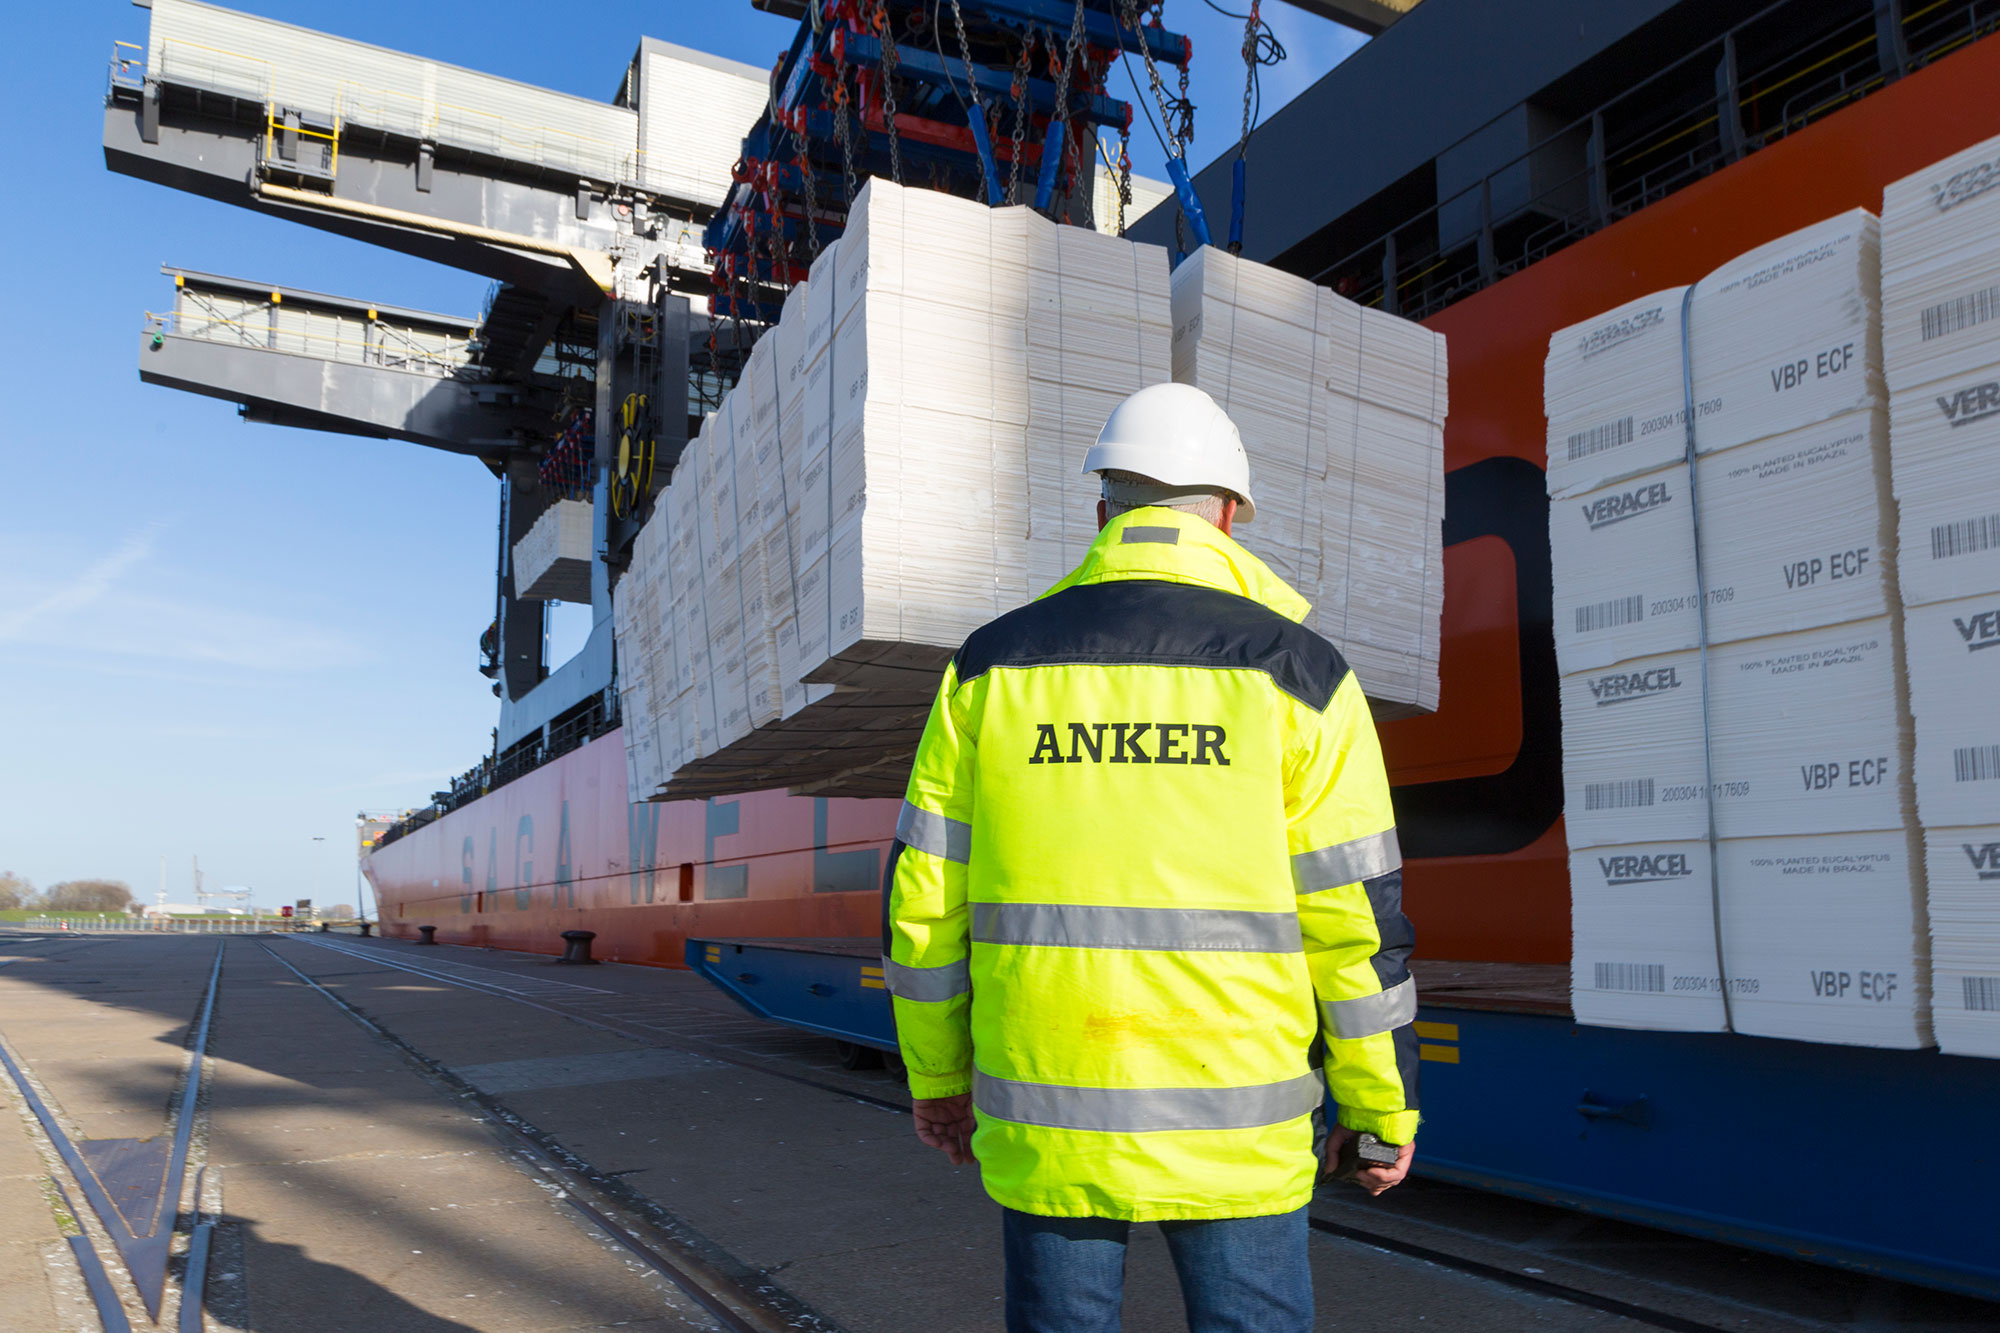 Handling of Forest Products: A crane loading forest products from a freighter onto a tractor, under the supervision of a person in a yellow Anker Schiffahrt warning jacket